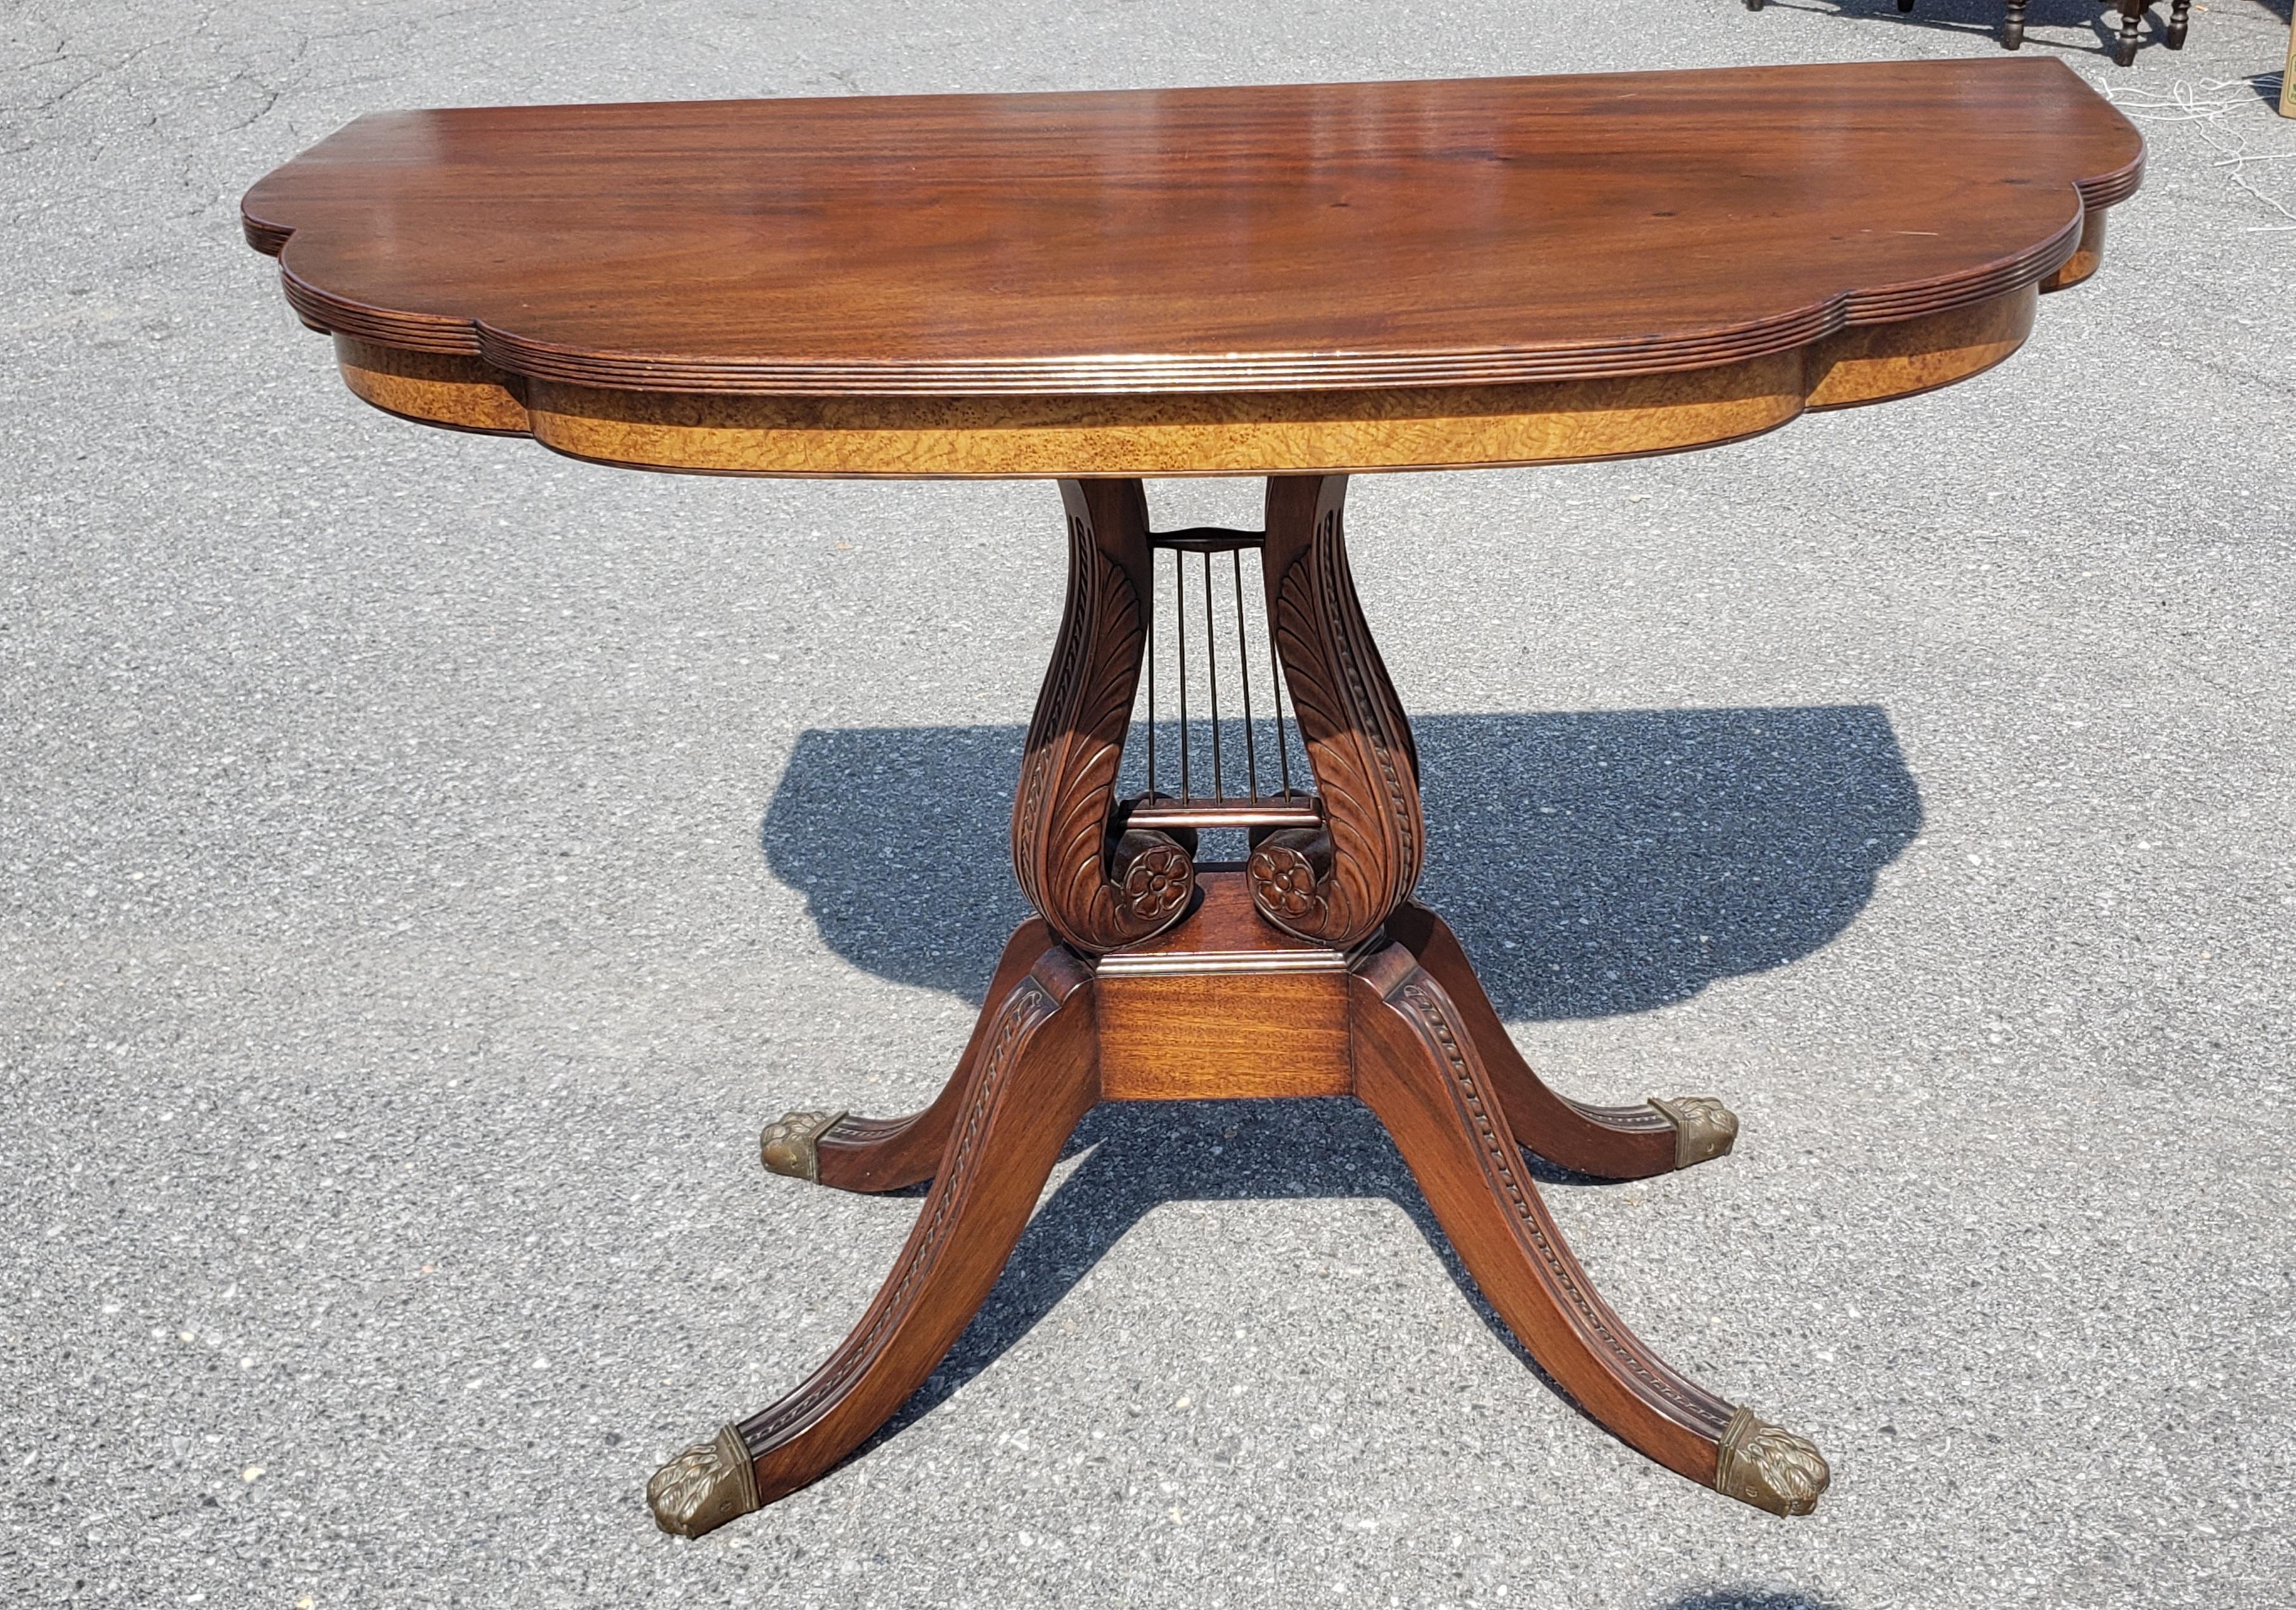 A 1950s Regency Style Mahogany Quadpod Lyre Pedestal Console Table with brass cap paw feet and walnut burl skirt.
Measures 42